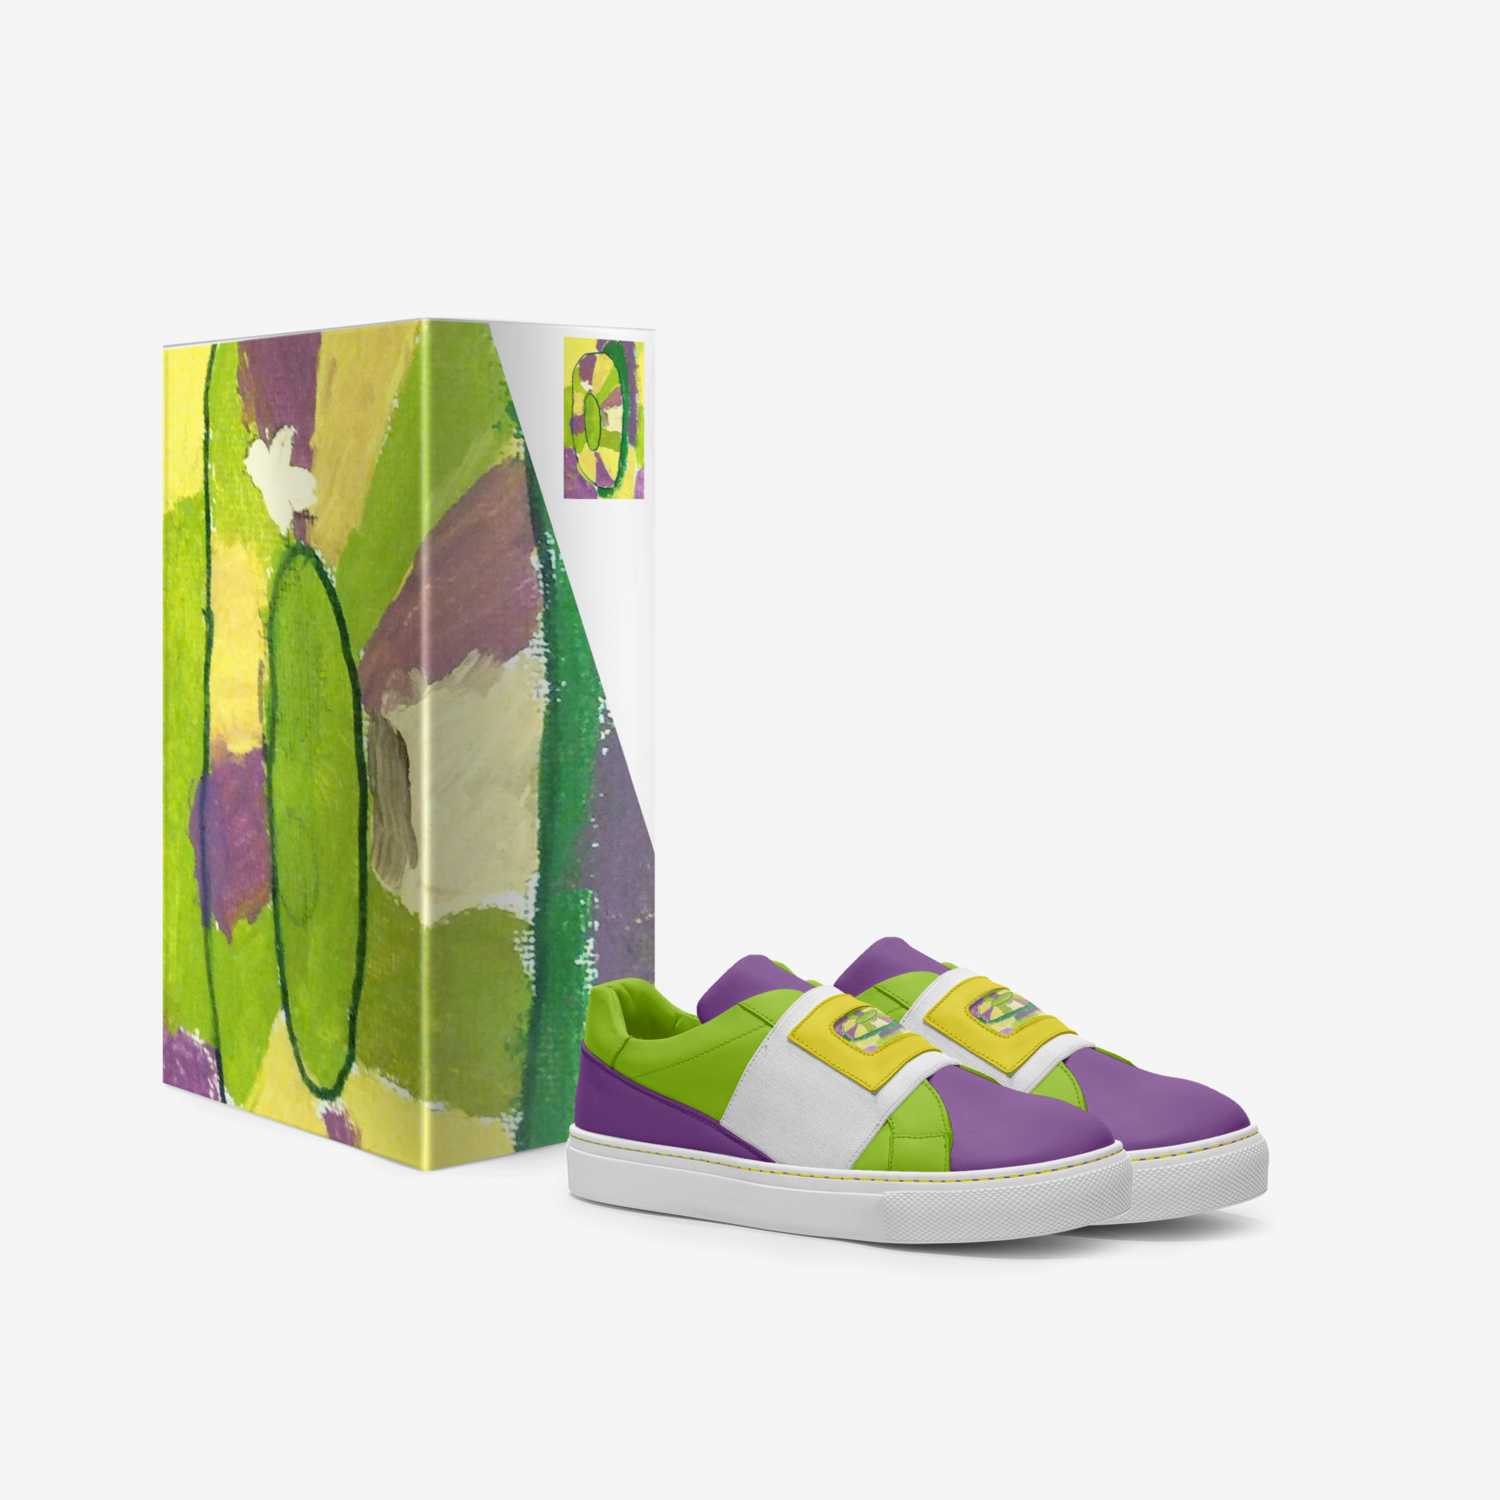 KingCakeKids custom made in Italy shoes by Patrick Jones | Box view